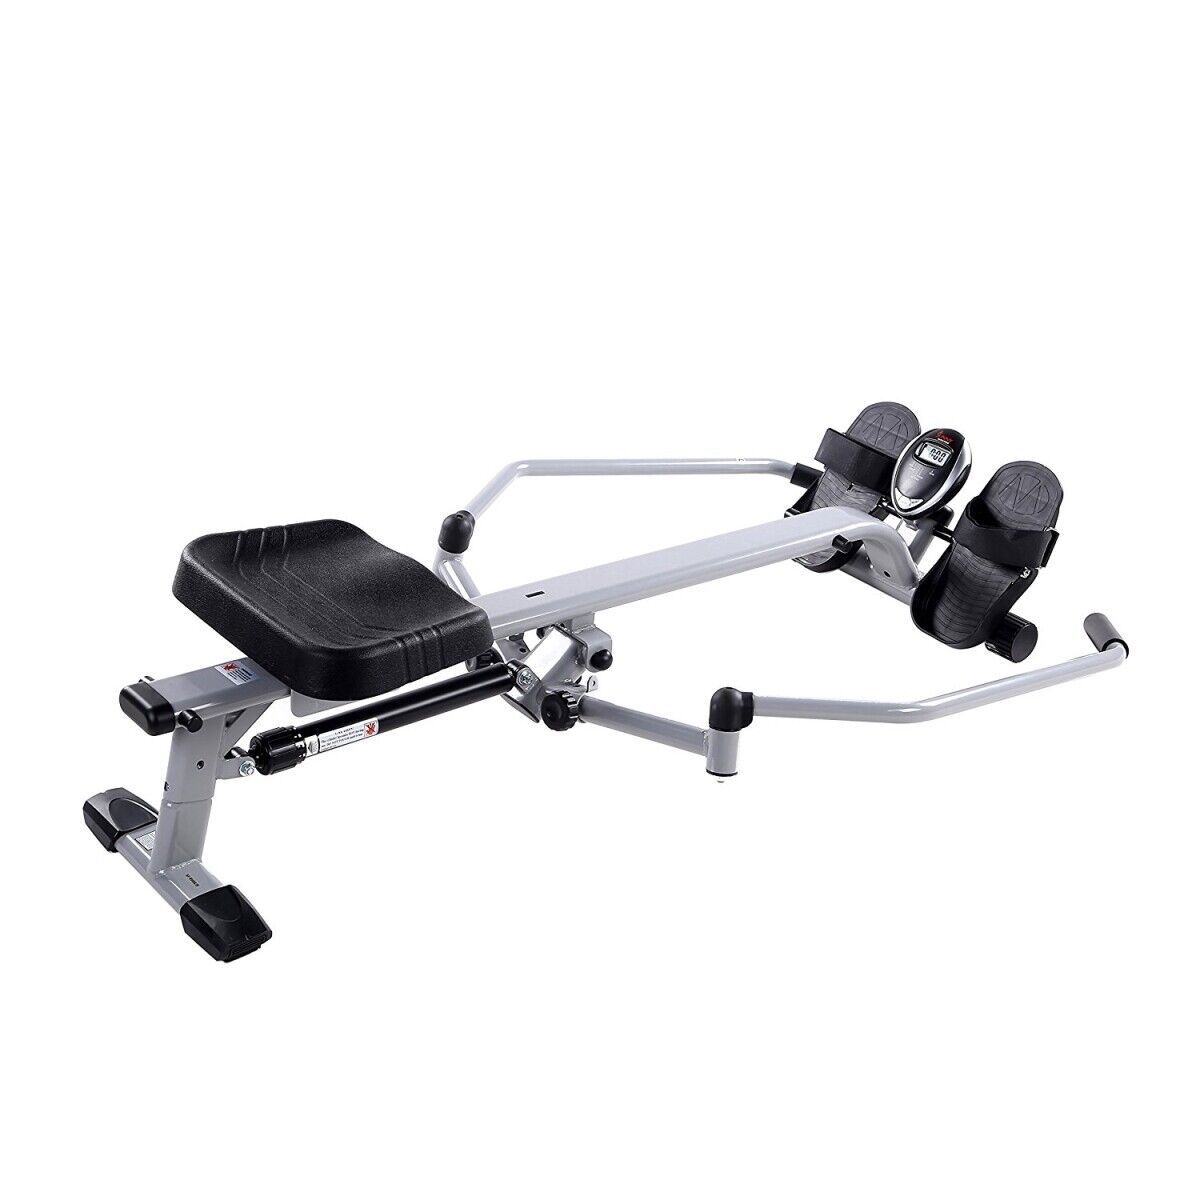 Sunny Health & Fitness  Full Motion Rowing Machine - $173.82